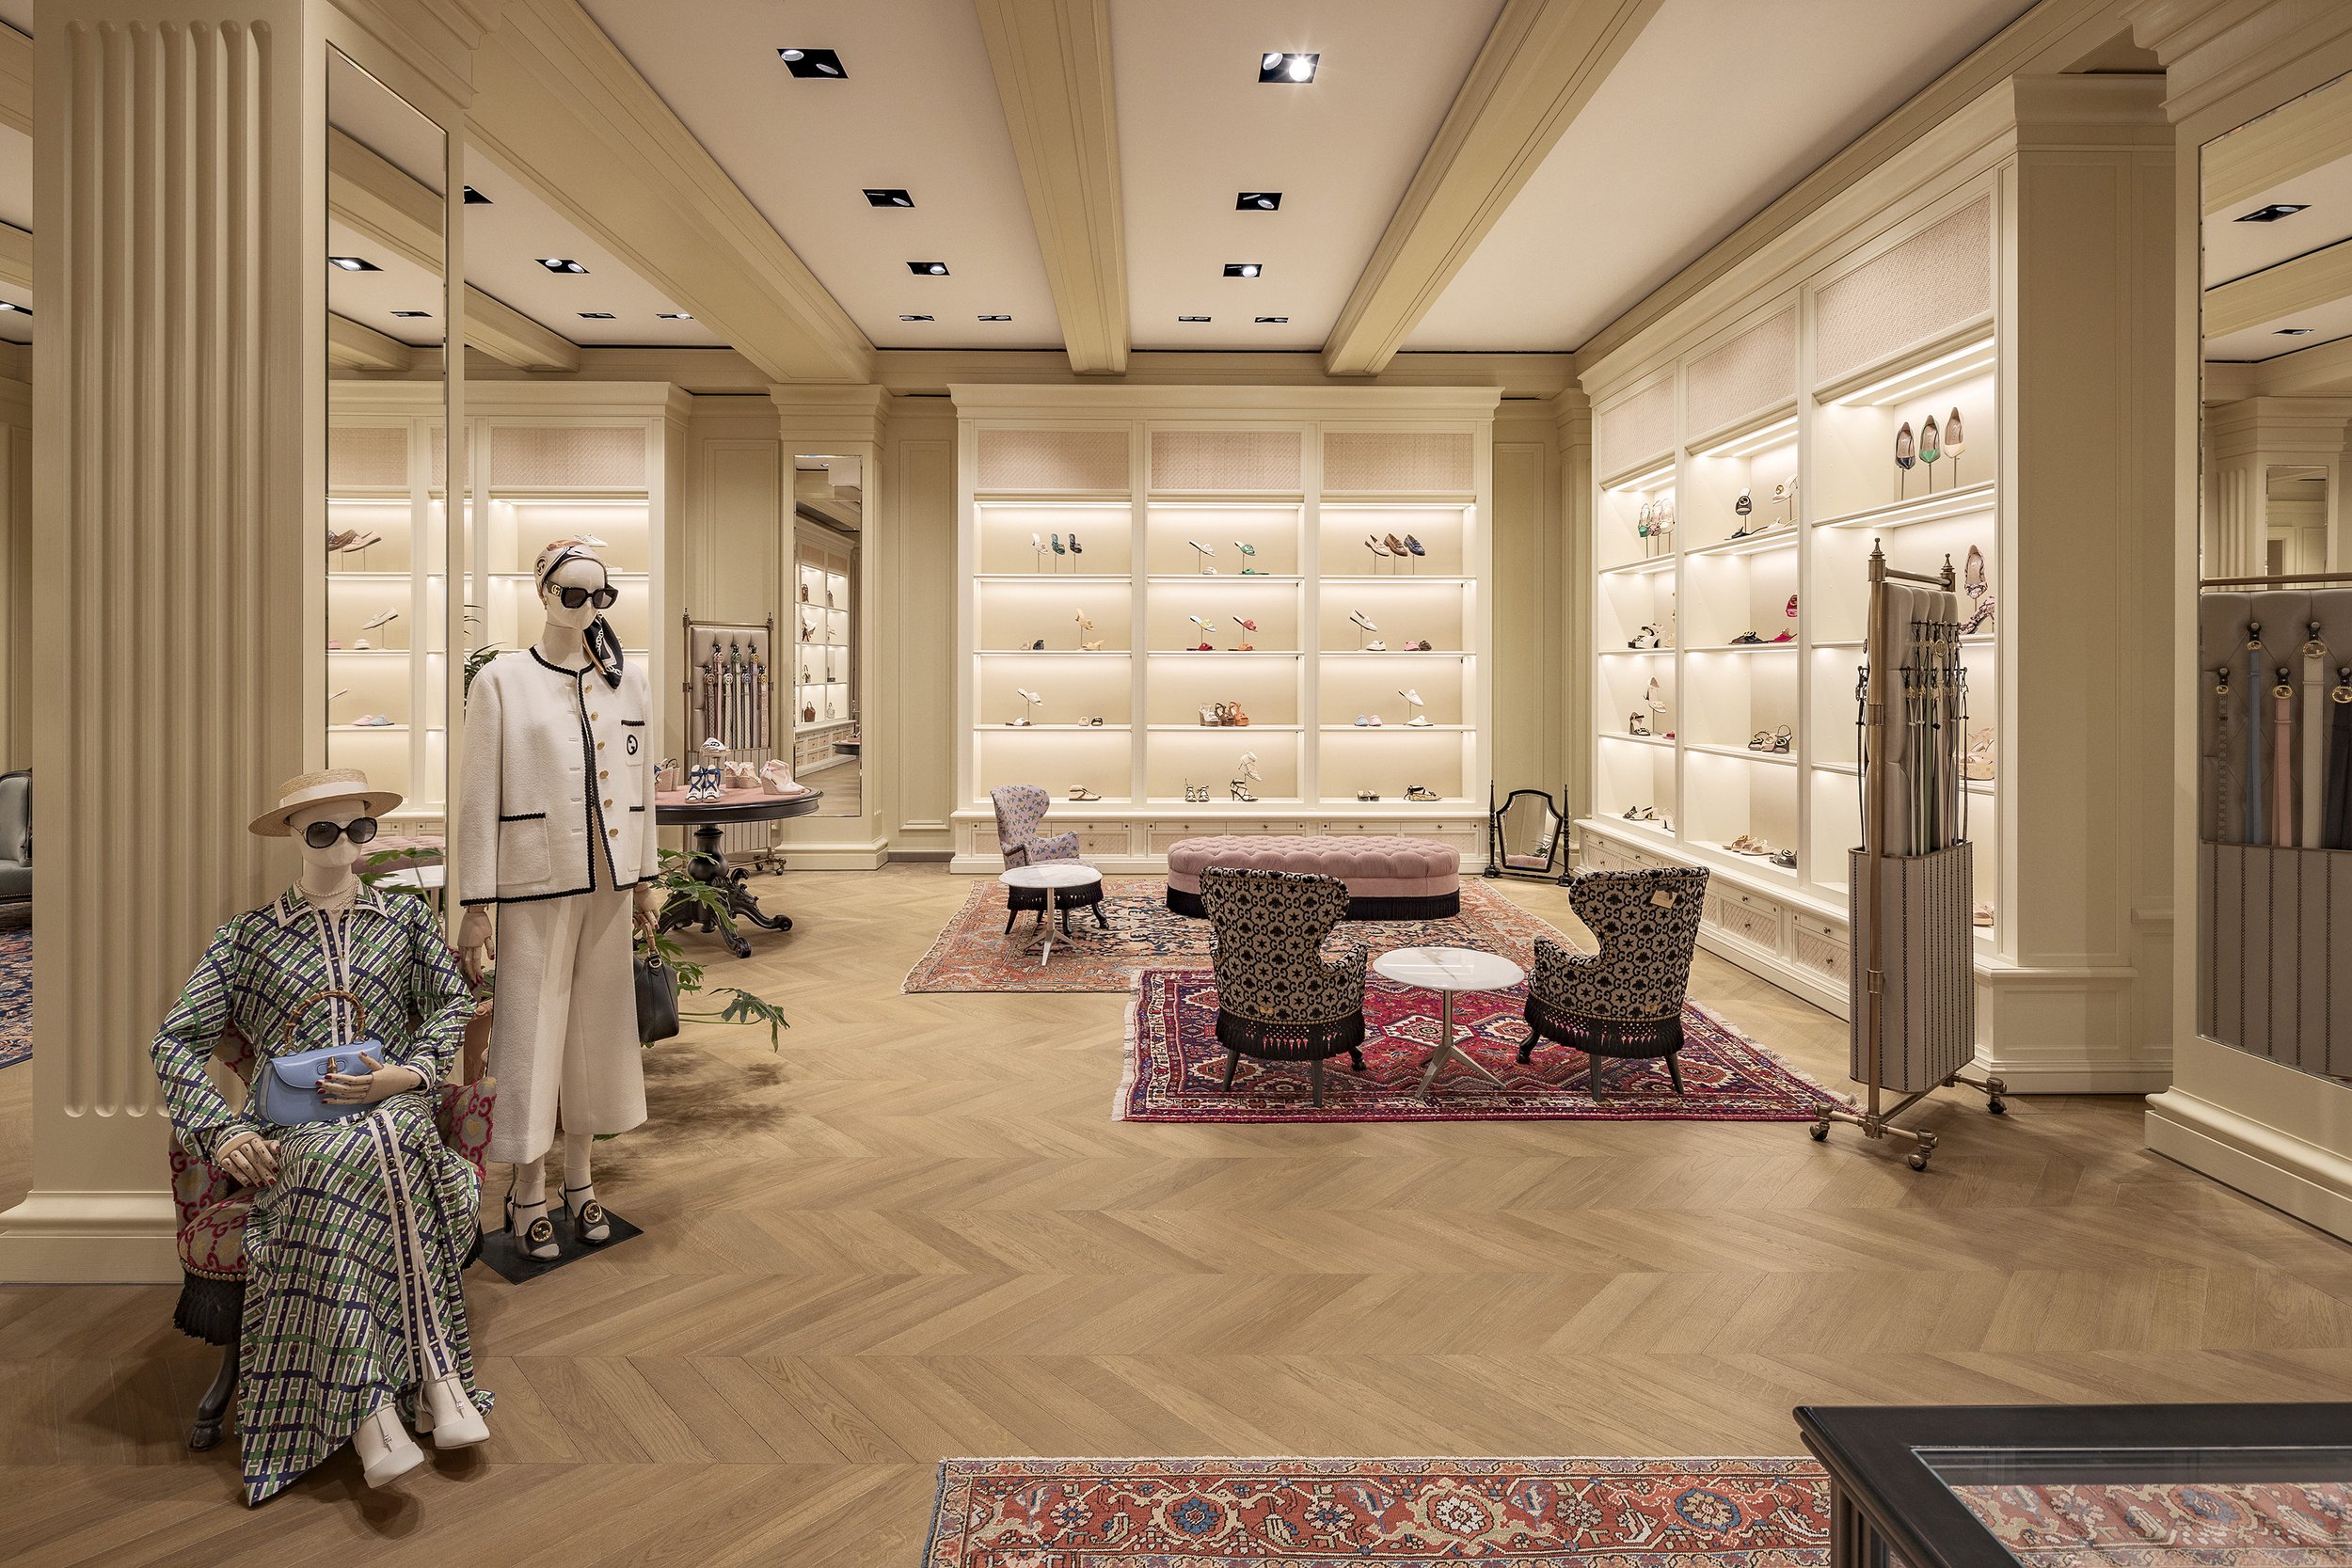 Gucci Opens Newly Expanded Two-Story Lavish Boutique At Bal Harbour Shops 7.jpg